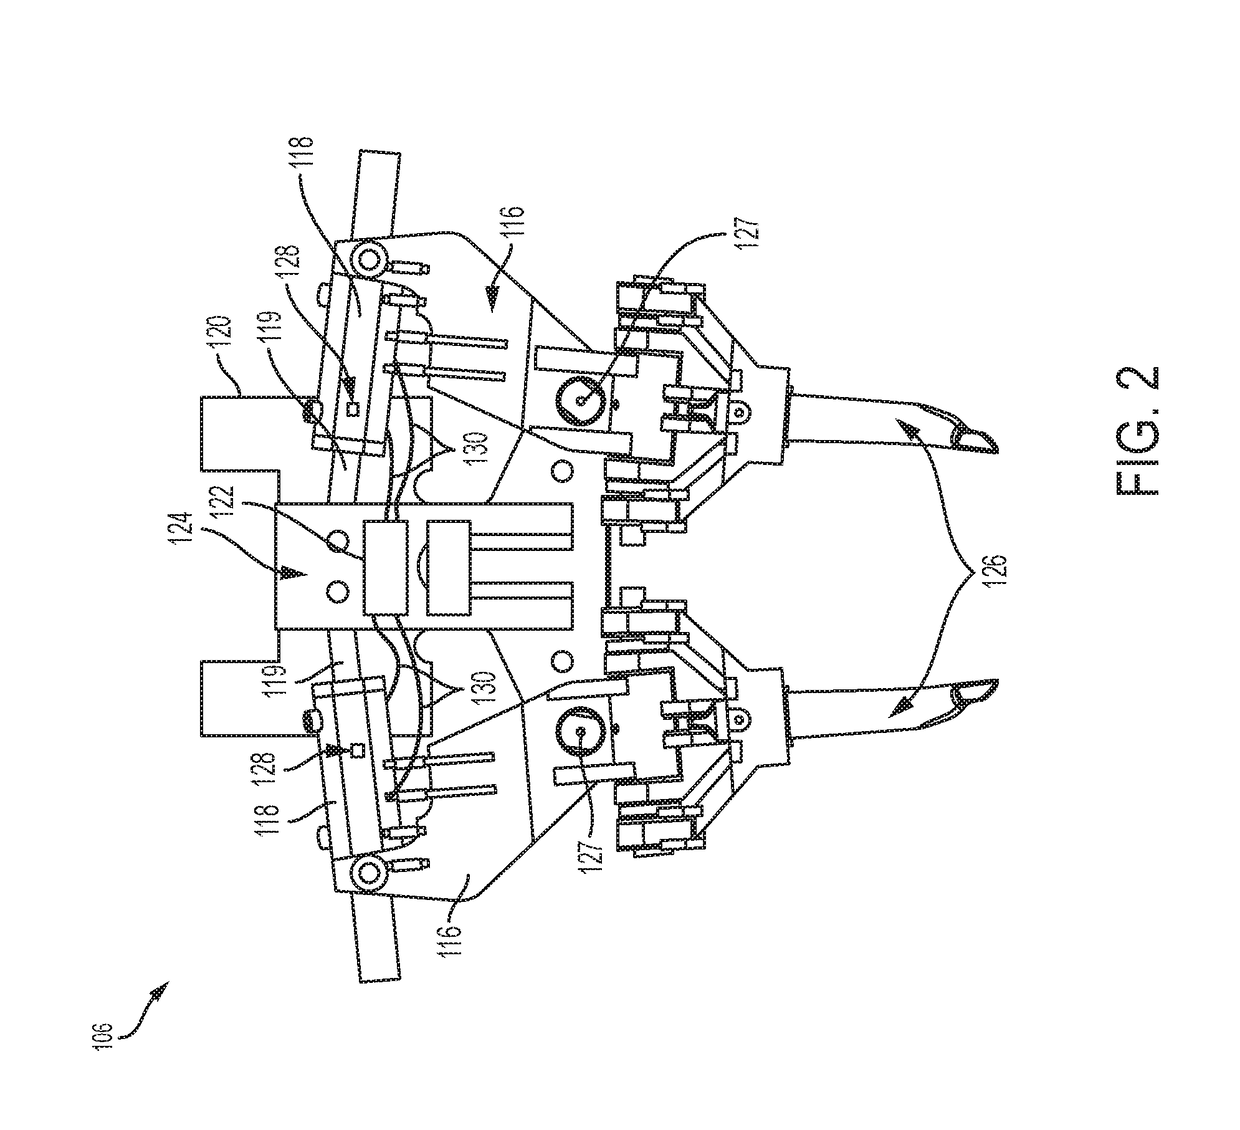 Apparatus and method for tamping ballast